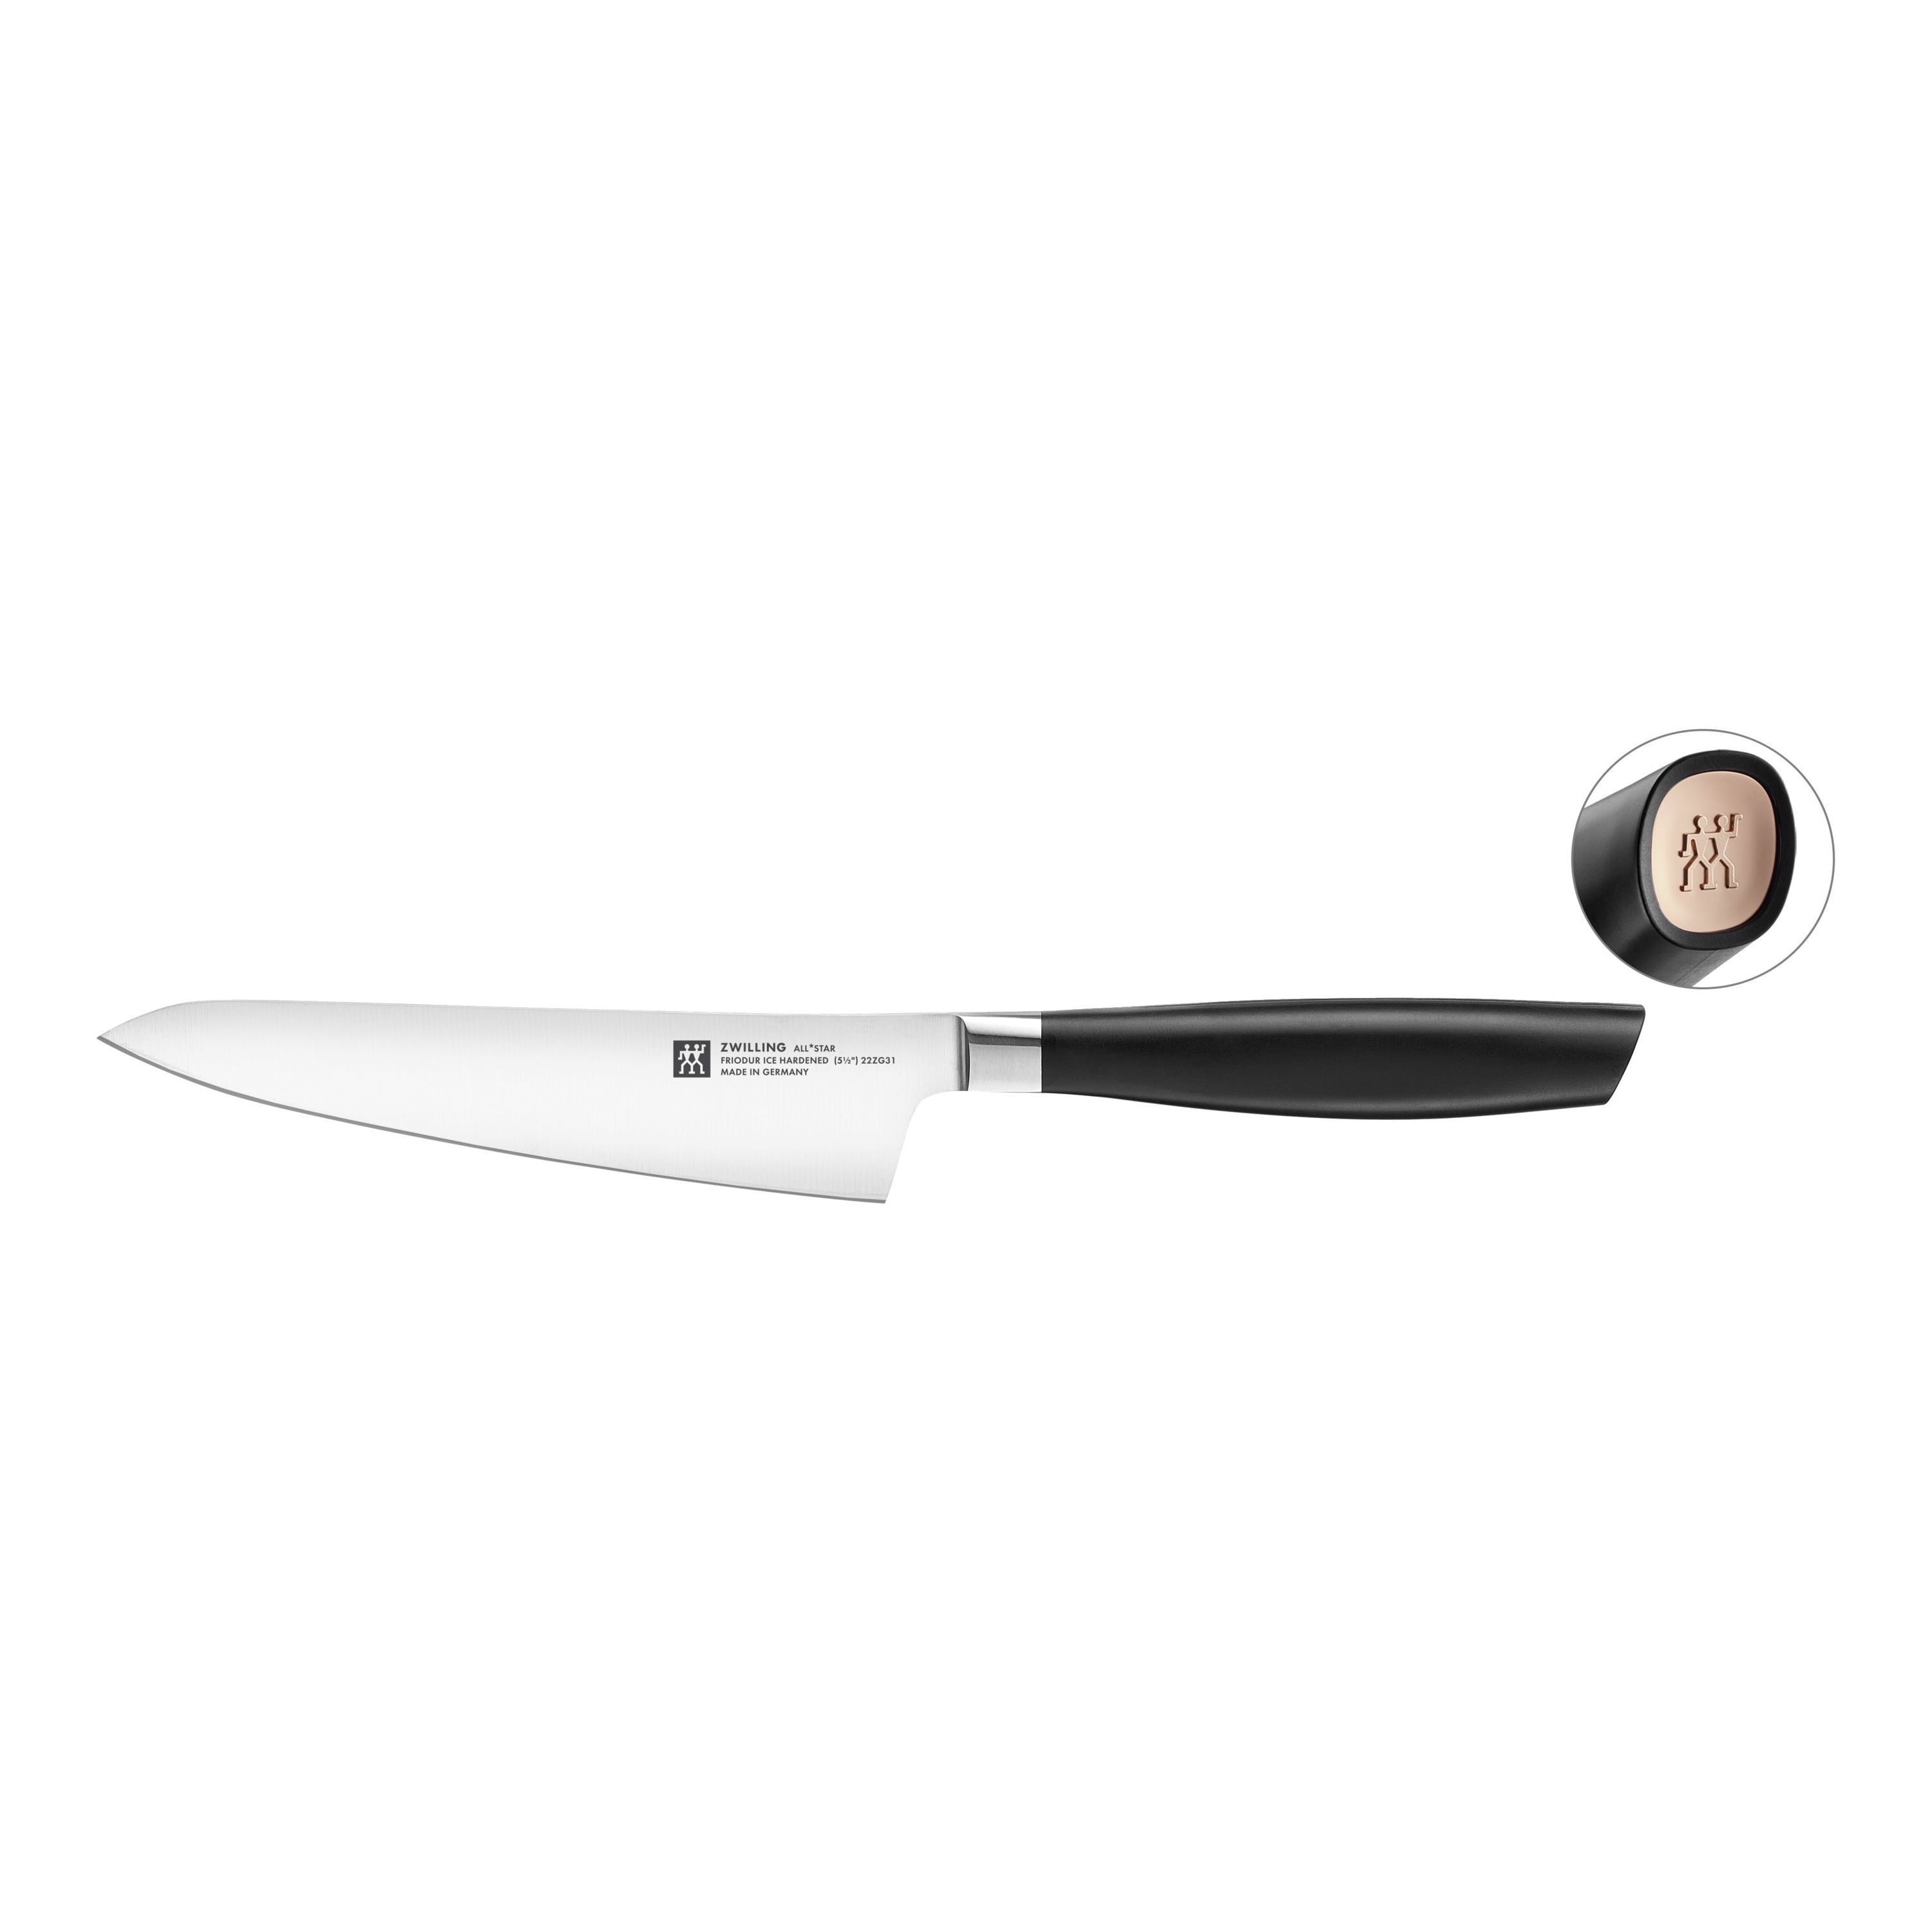 ZWILLING All * Star Couteau de chef compact 14 cm, or rose